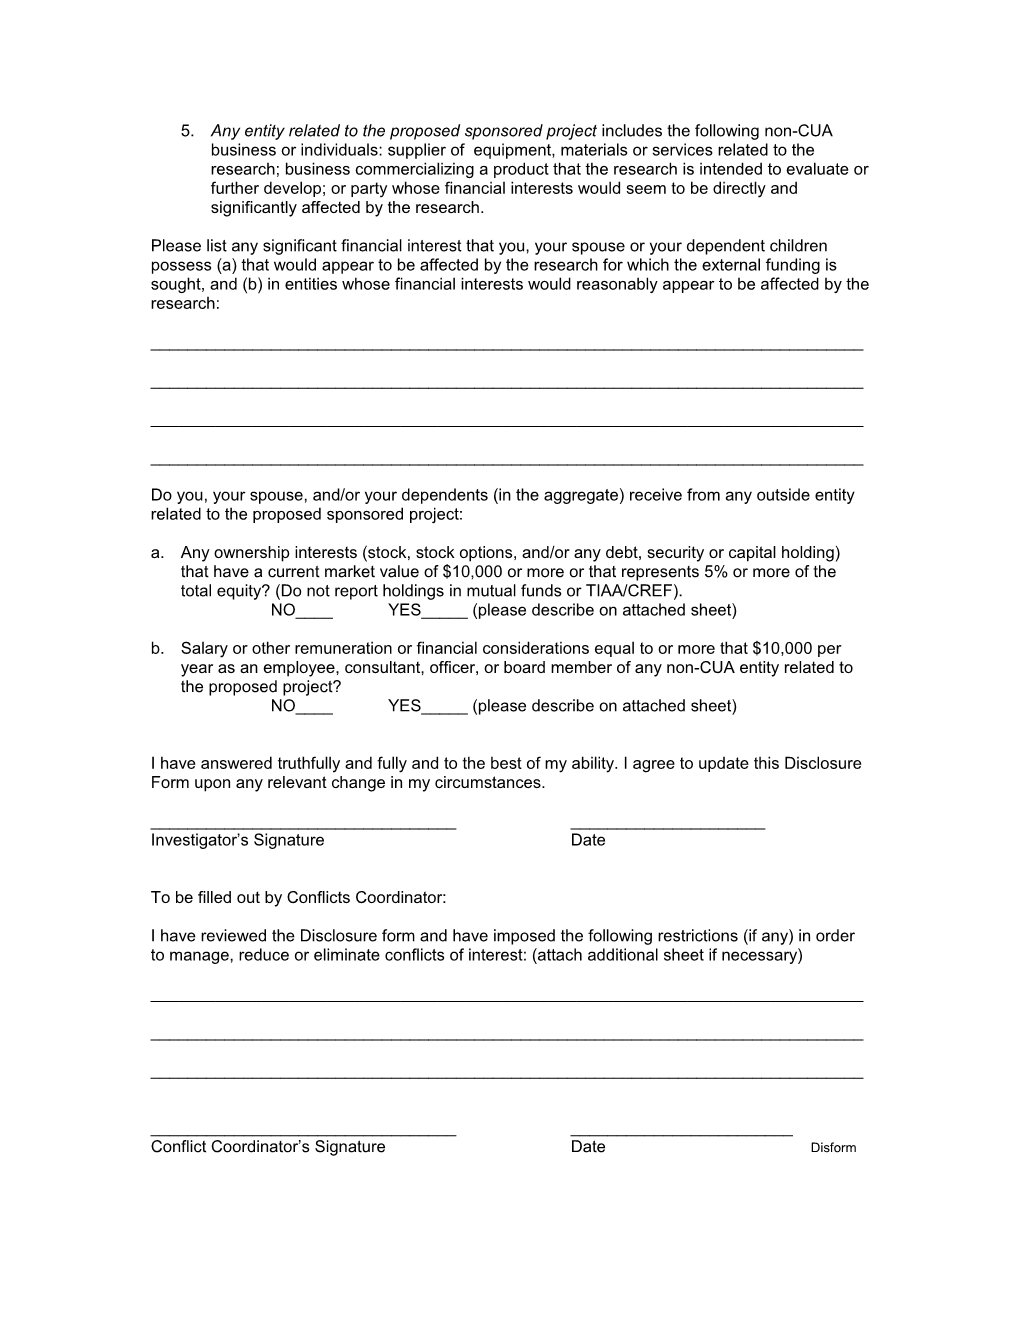 Disclosure Form to Impliment the Cua Policy on Conflict of Interest